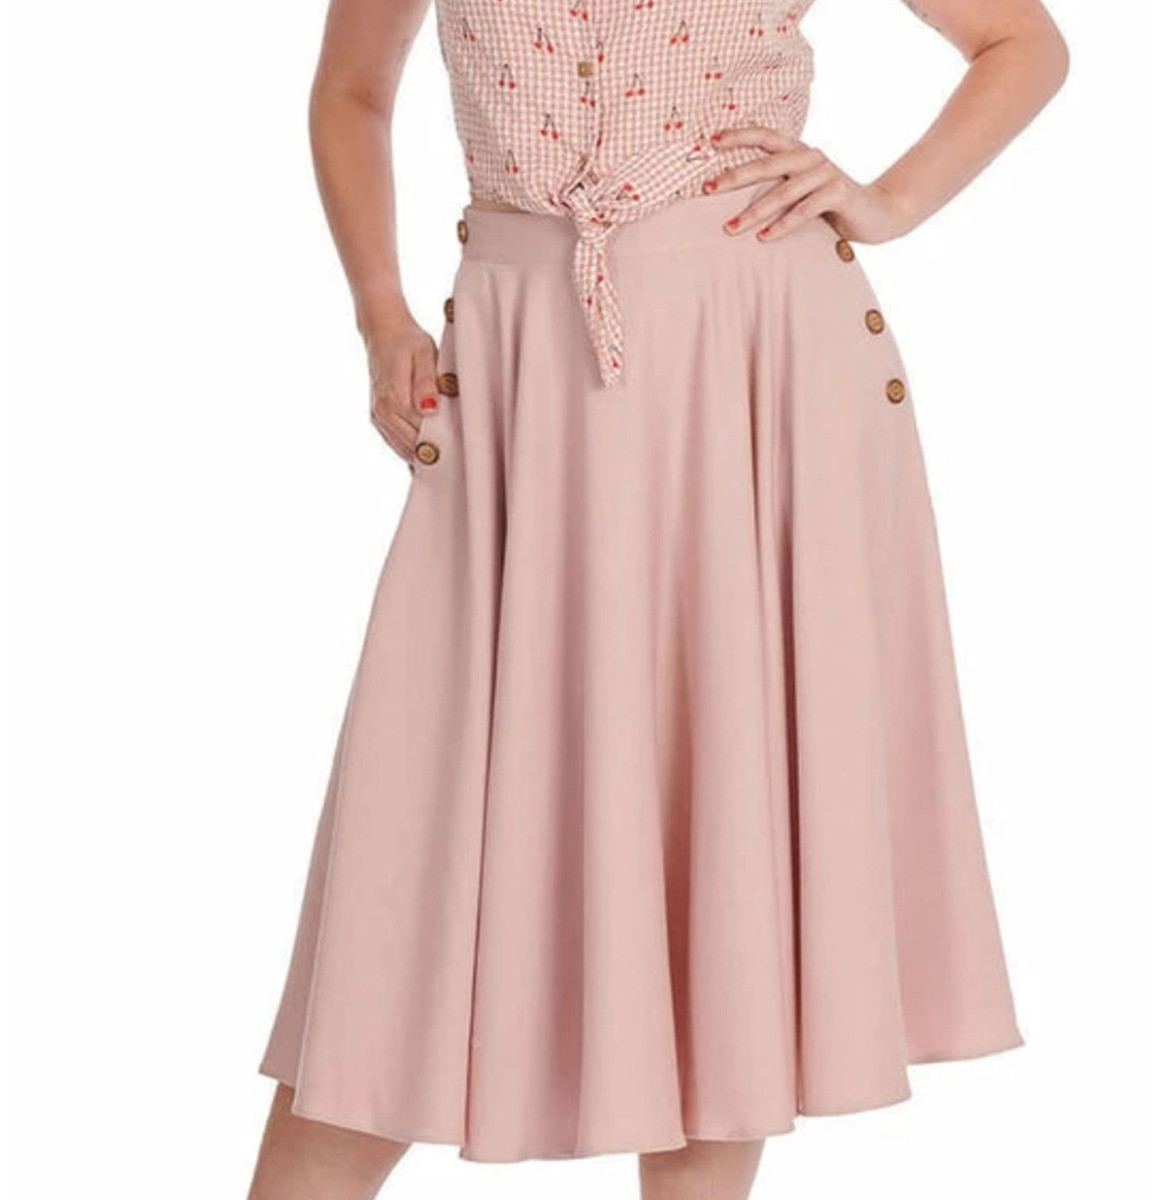 Banned Polly May Swing Skirt Pink -S